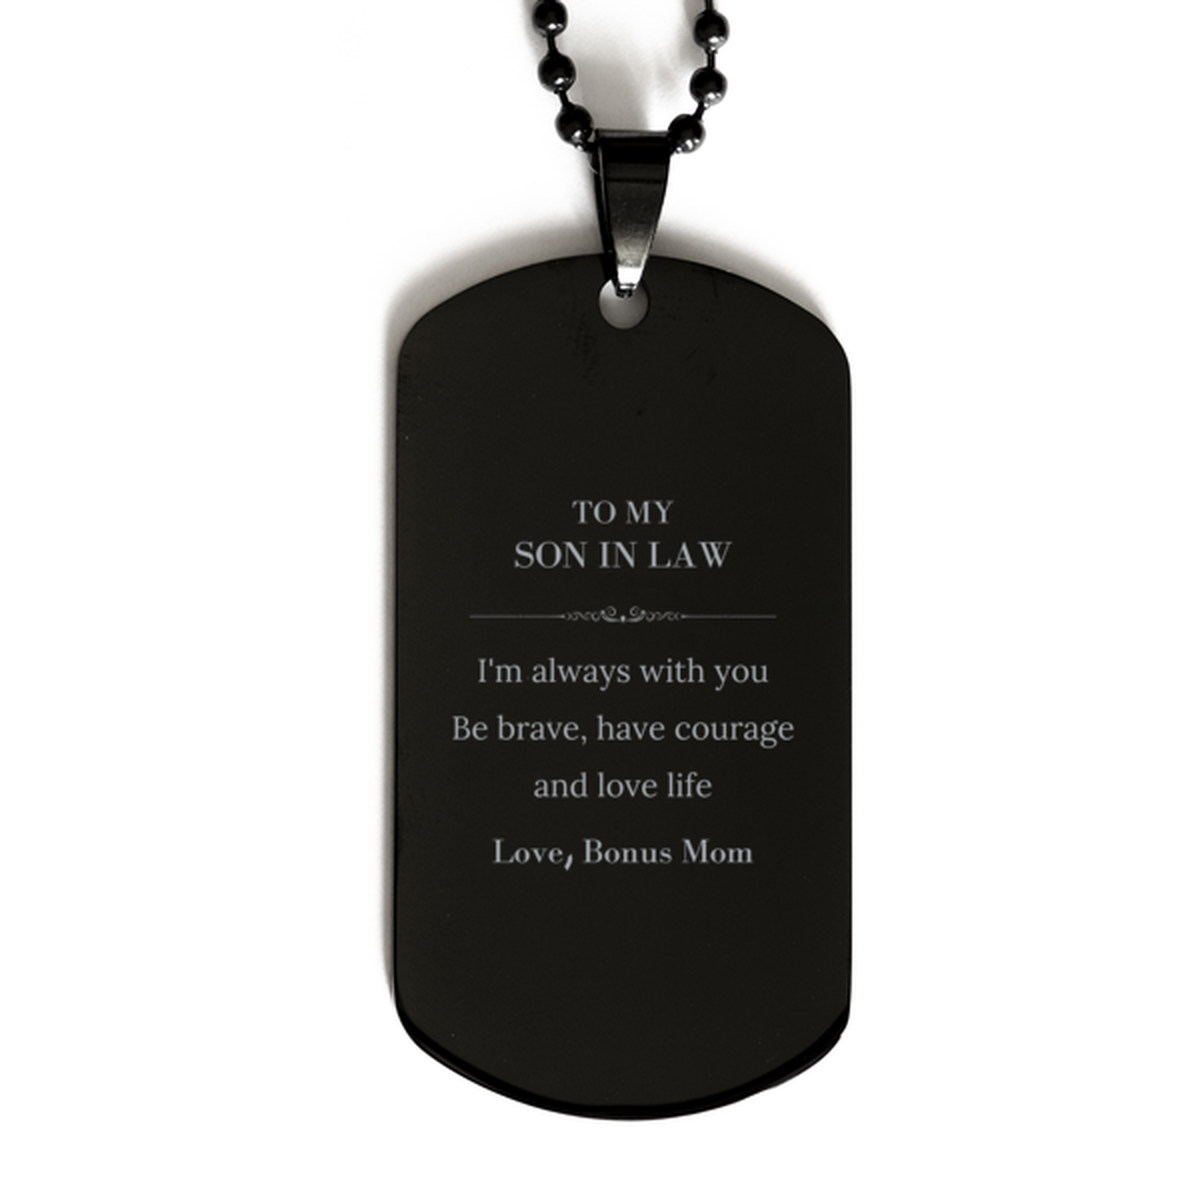 To My Son In Law Gifts from Bonus Mom, Unique Black Dog Tag Inspirational Christmas Birthday Graduation Gifts for Son In Law I'm always with you. Be brave, have courage and love life. Love, Bonus Mom